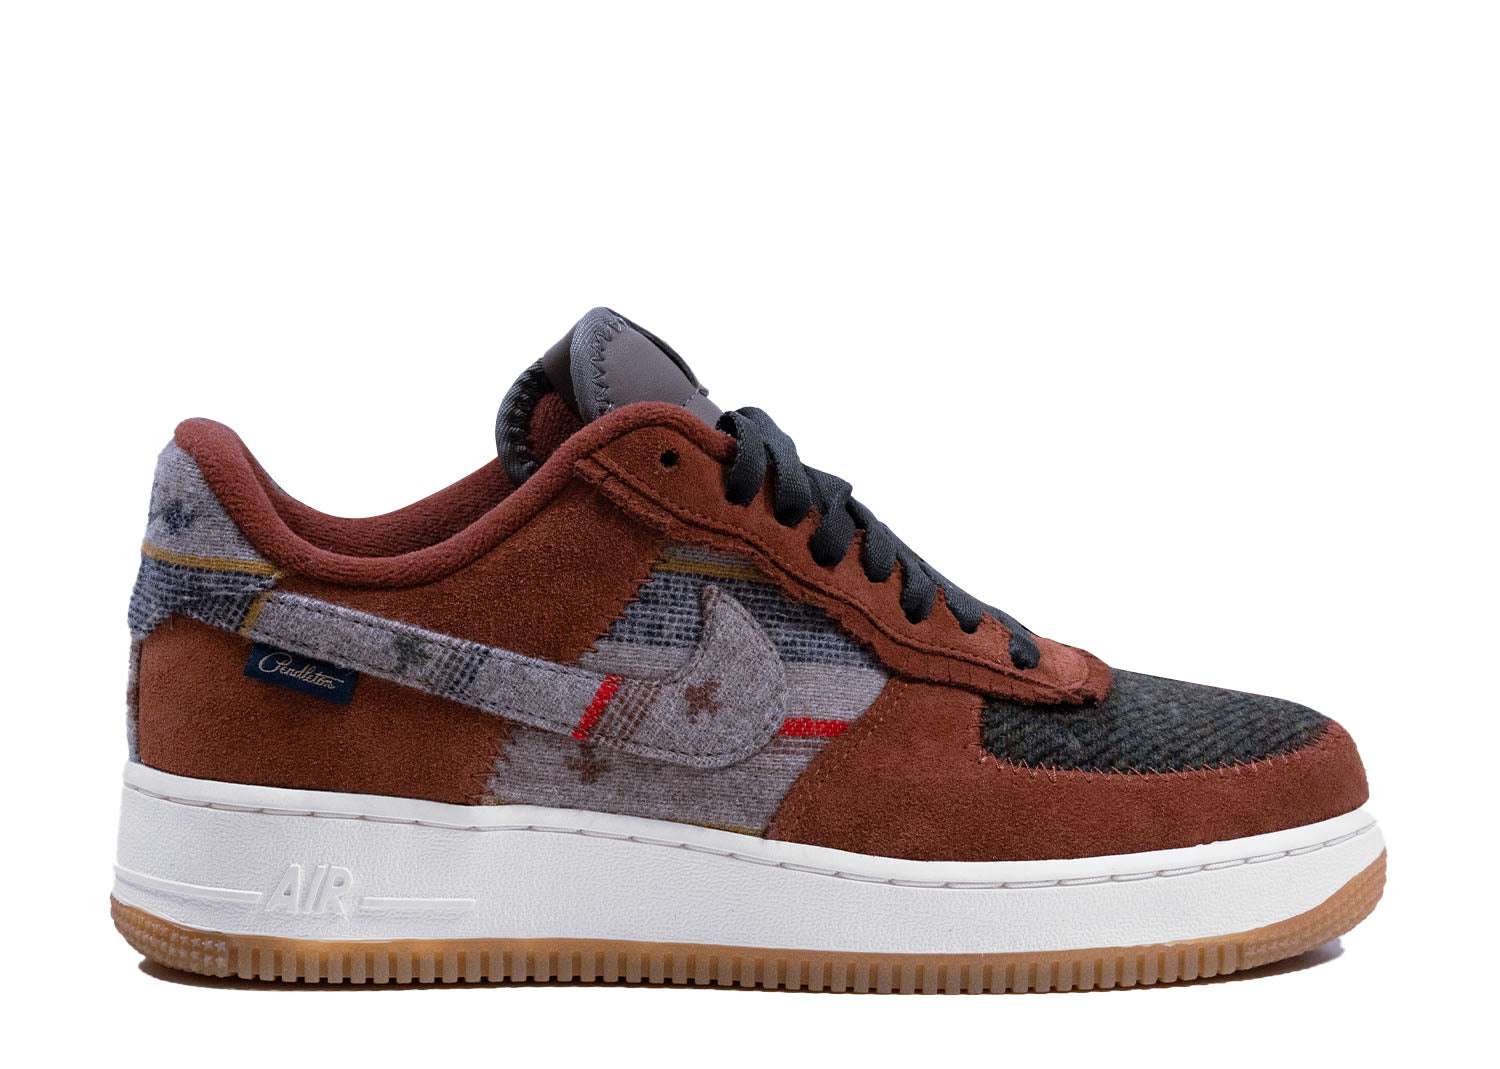 Second Chance - sail nike Air Force 1 ID Pendleton Brown - 41 | NEW